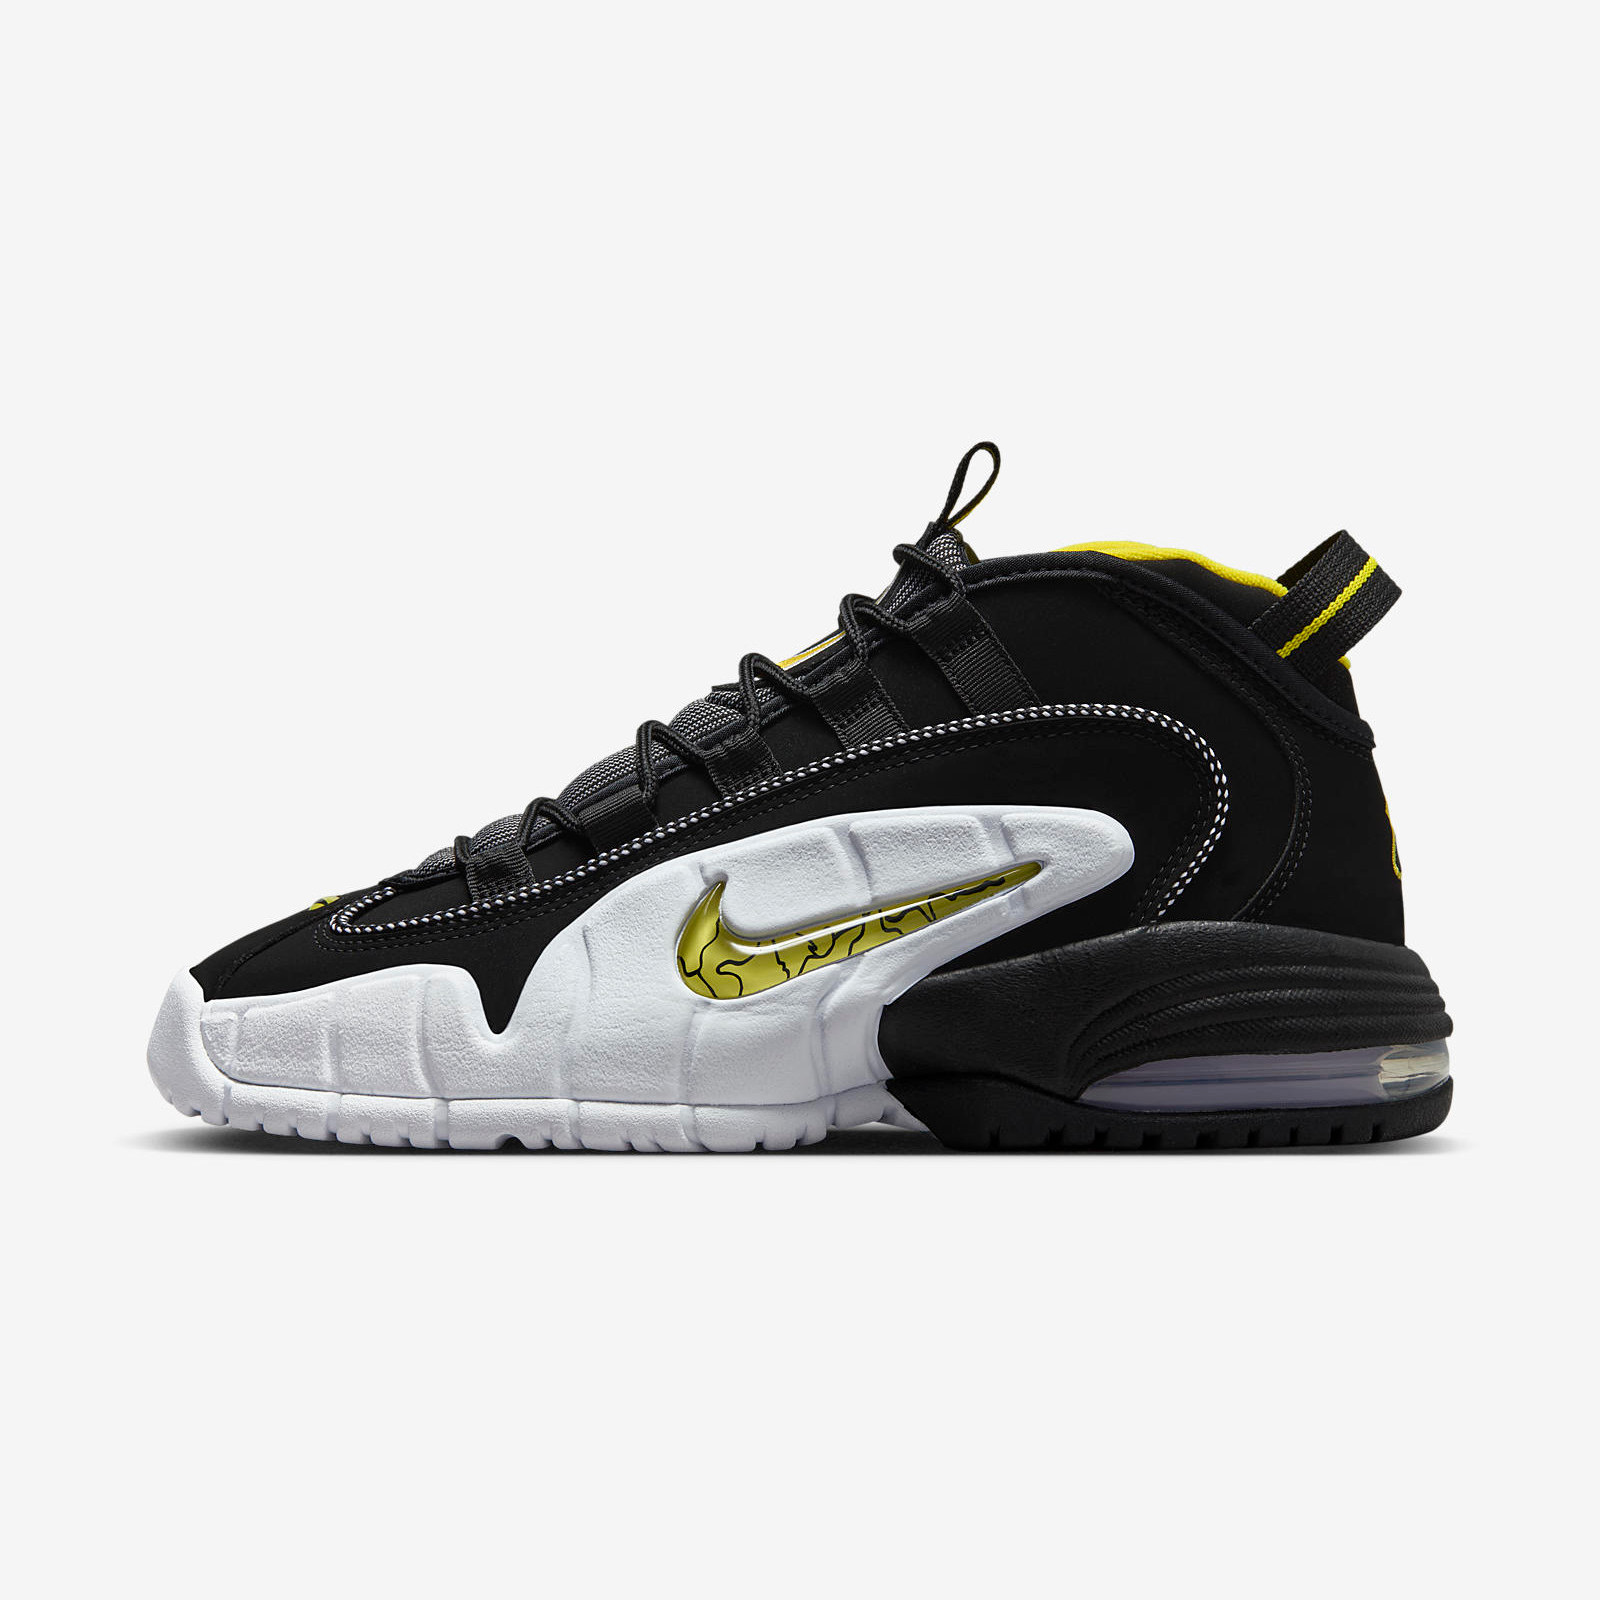 Nike Air Max Penny 1
Lester Middle School